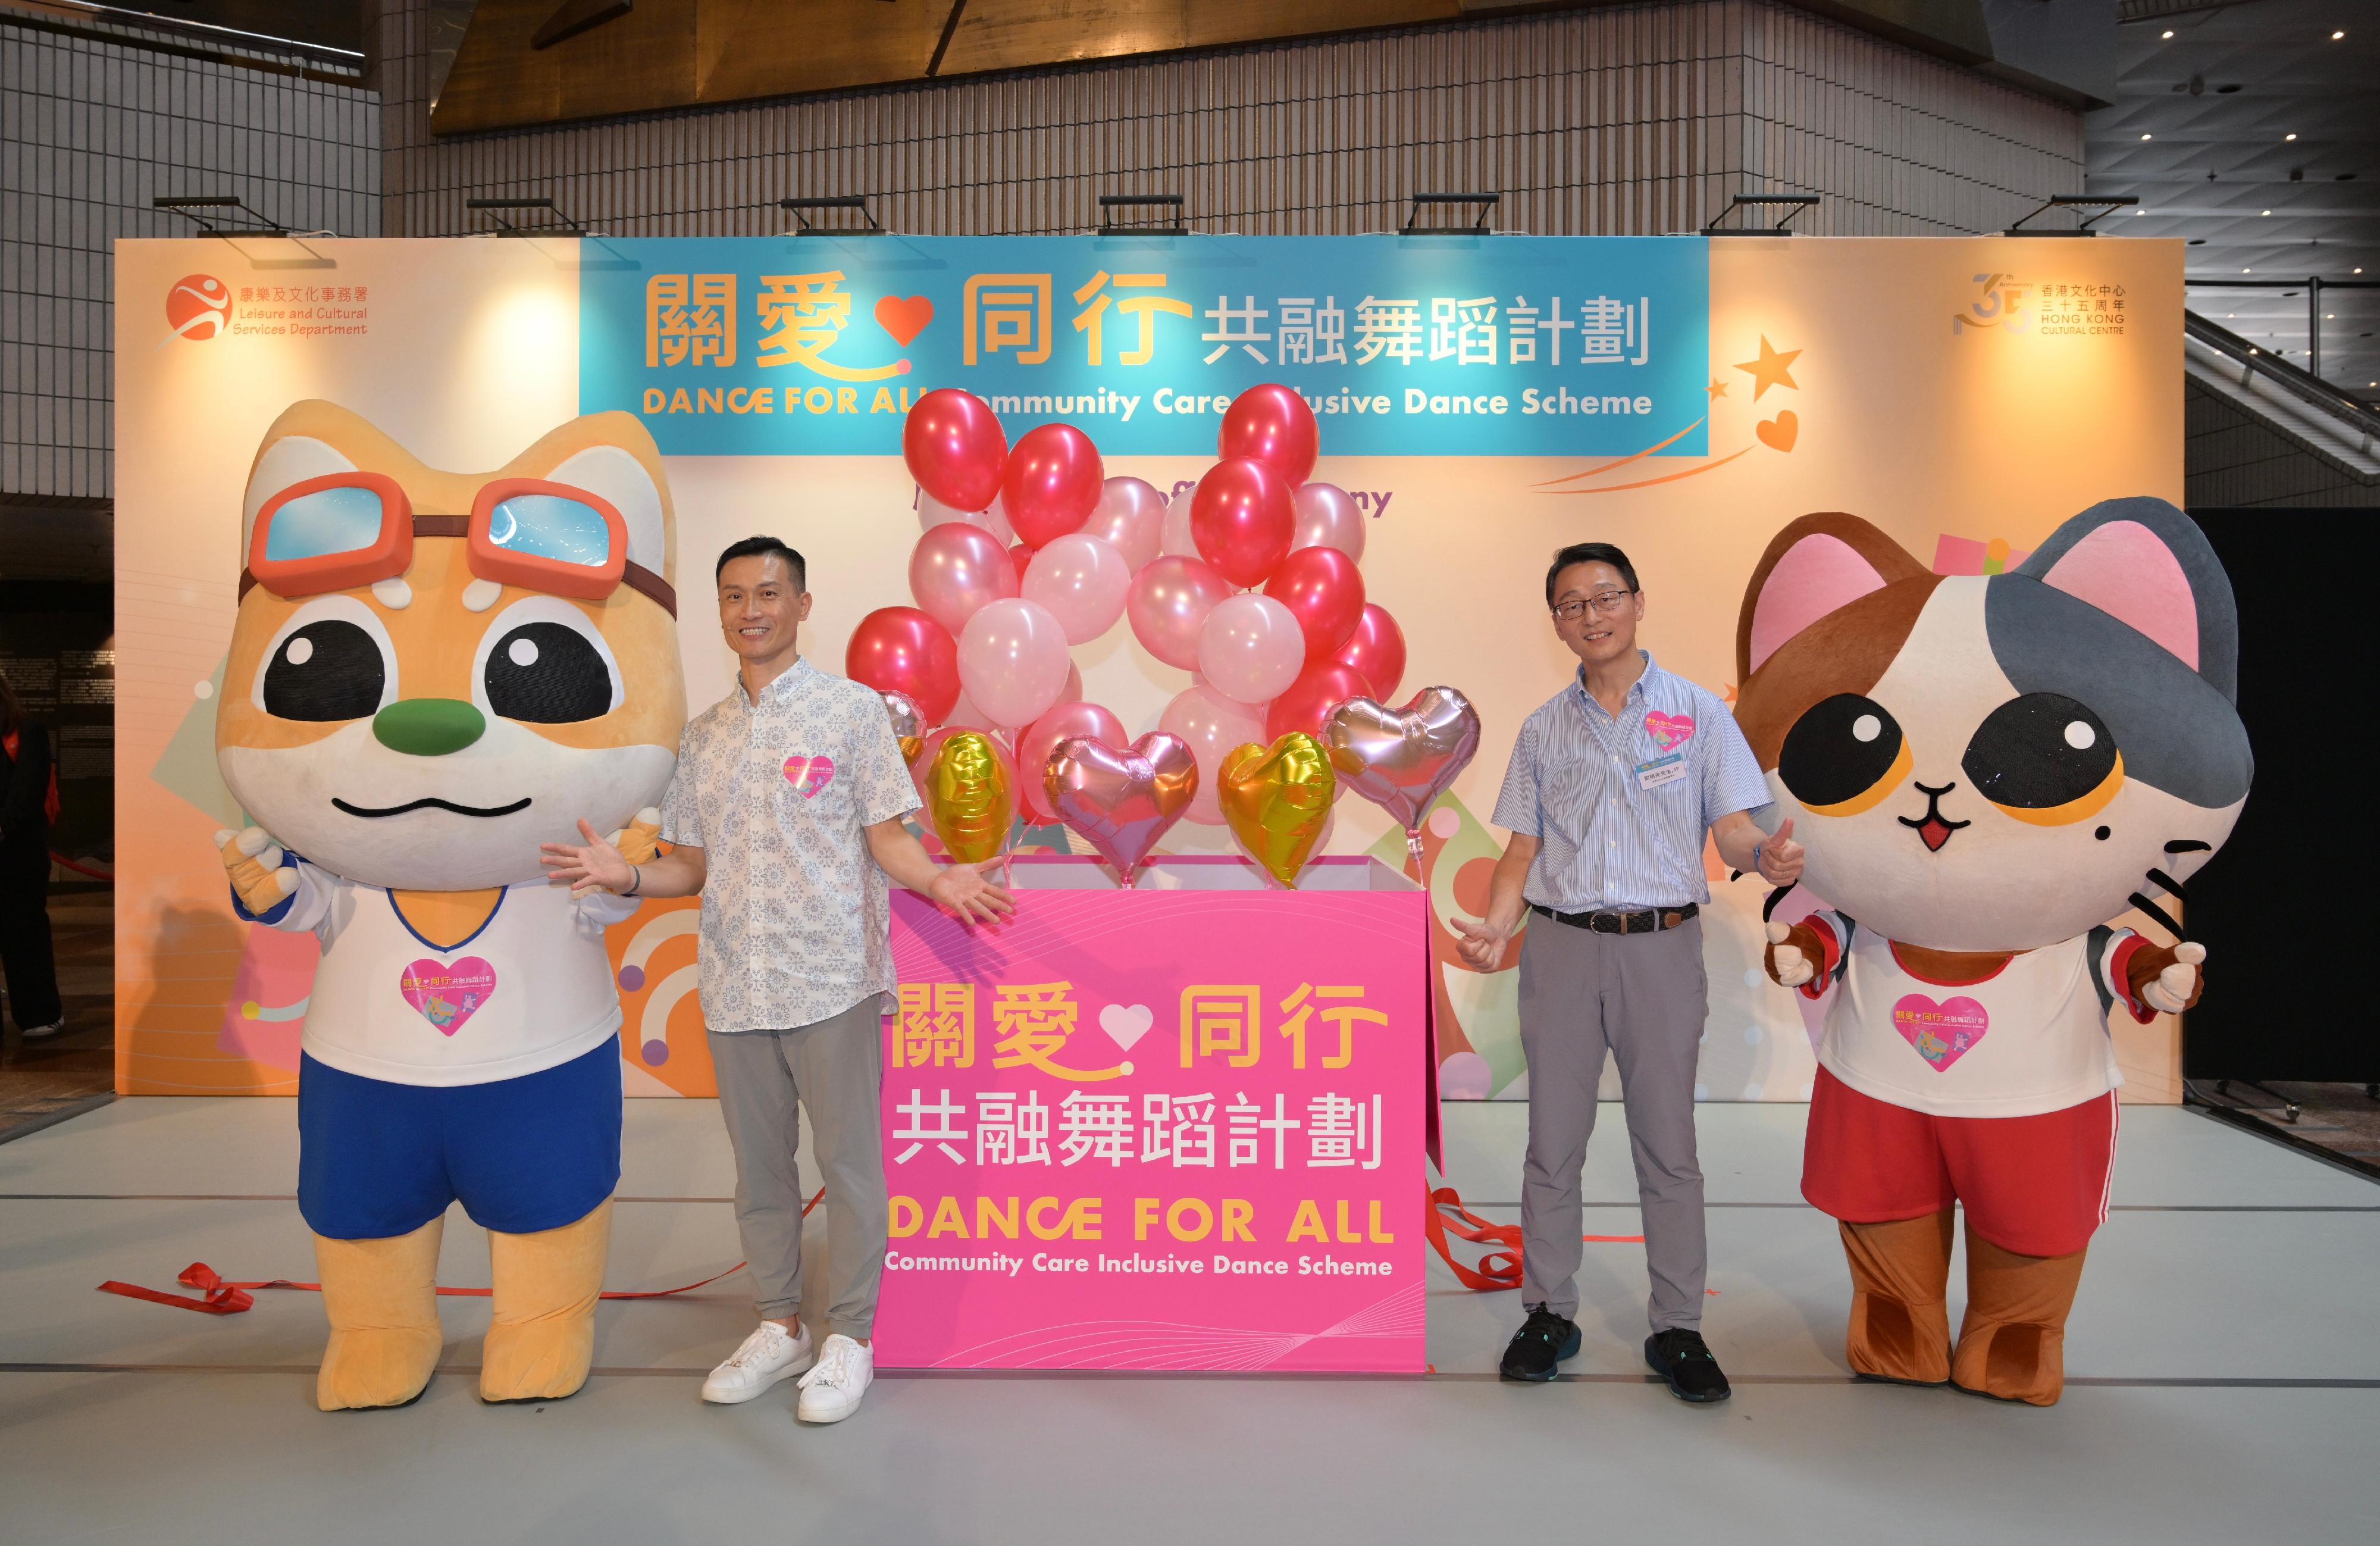 The "Dance for All" Community Care Inclusive Dance Scheme, organised by the Leisure and Cultural Services Department, was launched today (May 5). Based at the Hong Kong Cultural Centre, the 15-month scheme promotes social inclusion by serving as a platform for people with different abilities to dance together. Photo shows the Director of Leisure and Cultural Services, Mr Vincent Liu (right), and veteran dance artist and the scheme’s Artistic Advisor, Andy Wong (left) officiating at the kick-off ceremony. 
